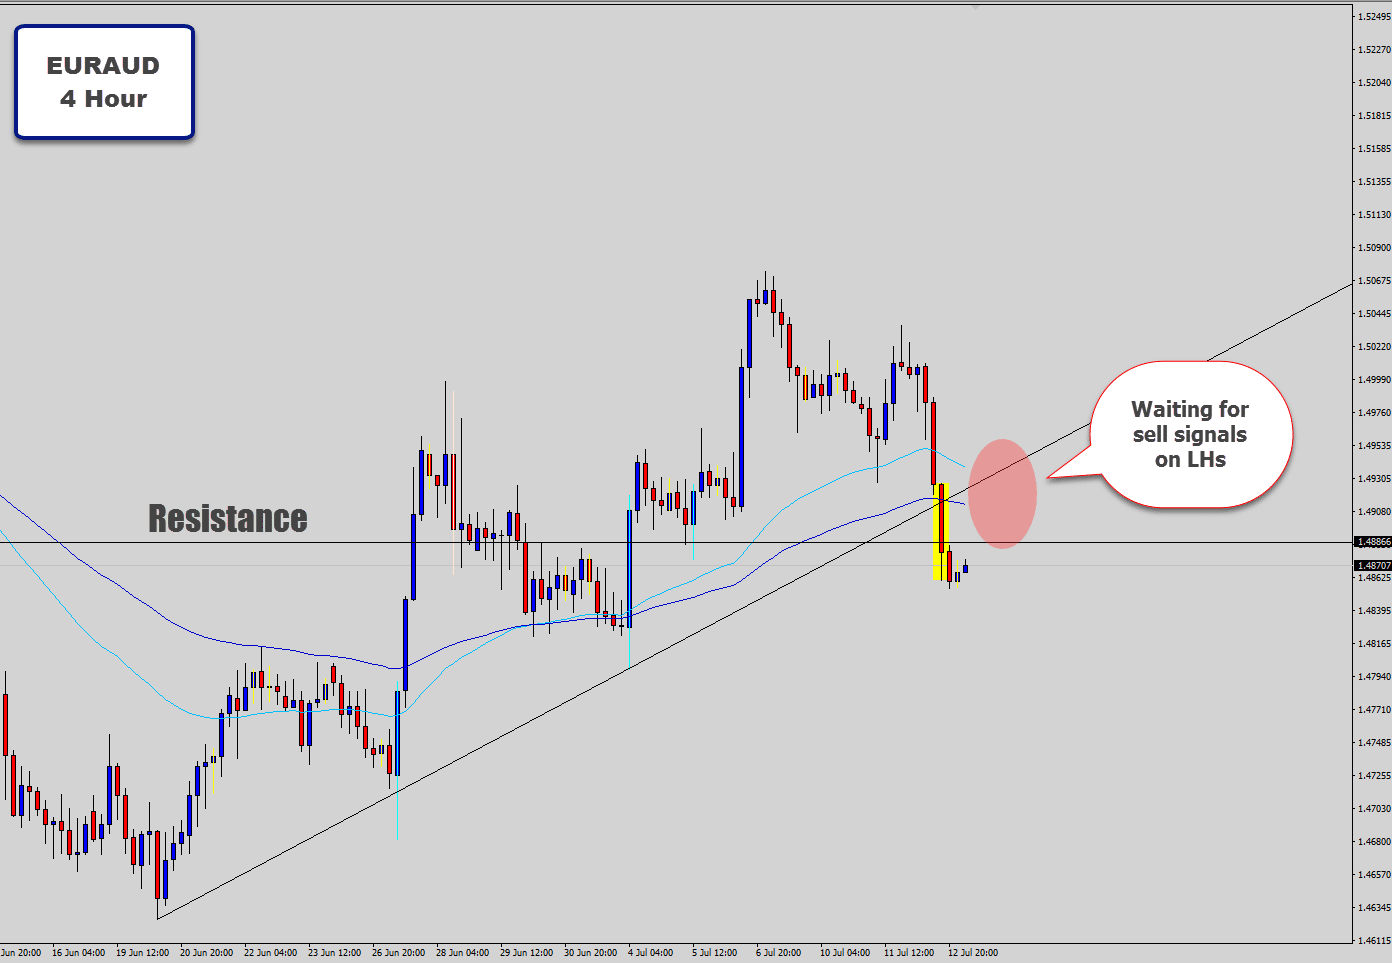 euraud 4 hour waiting to sell